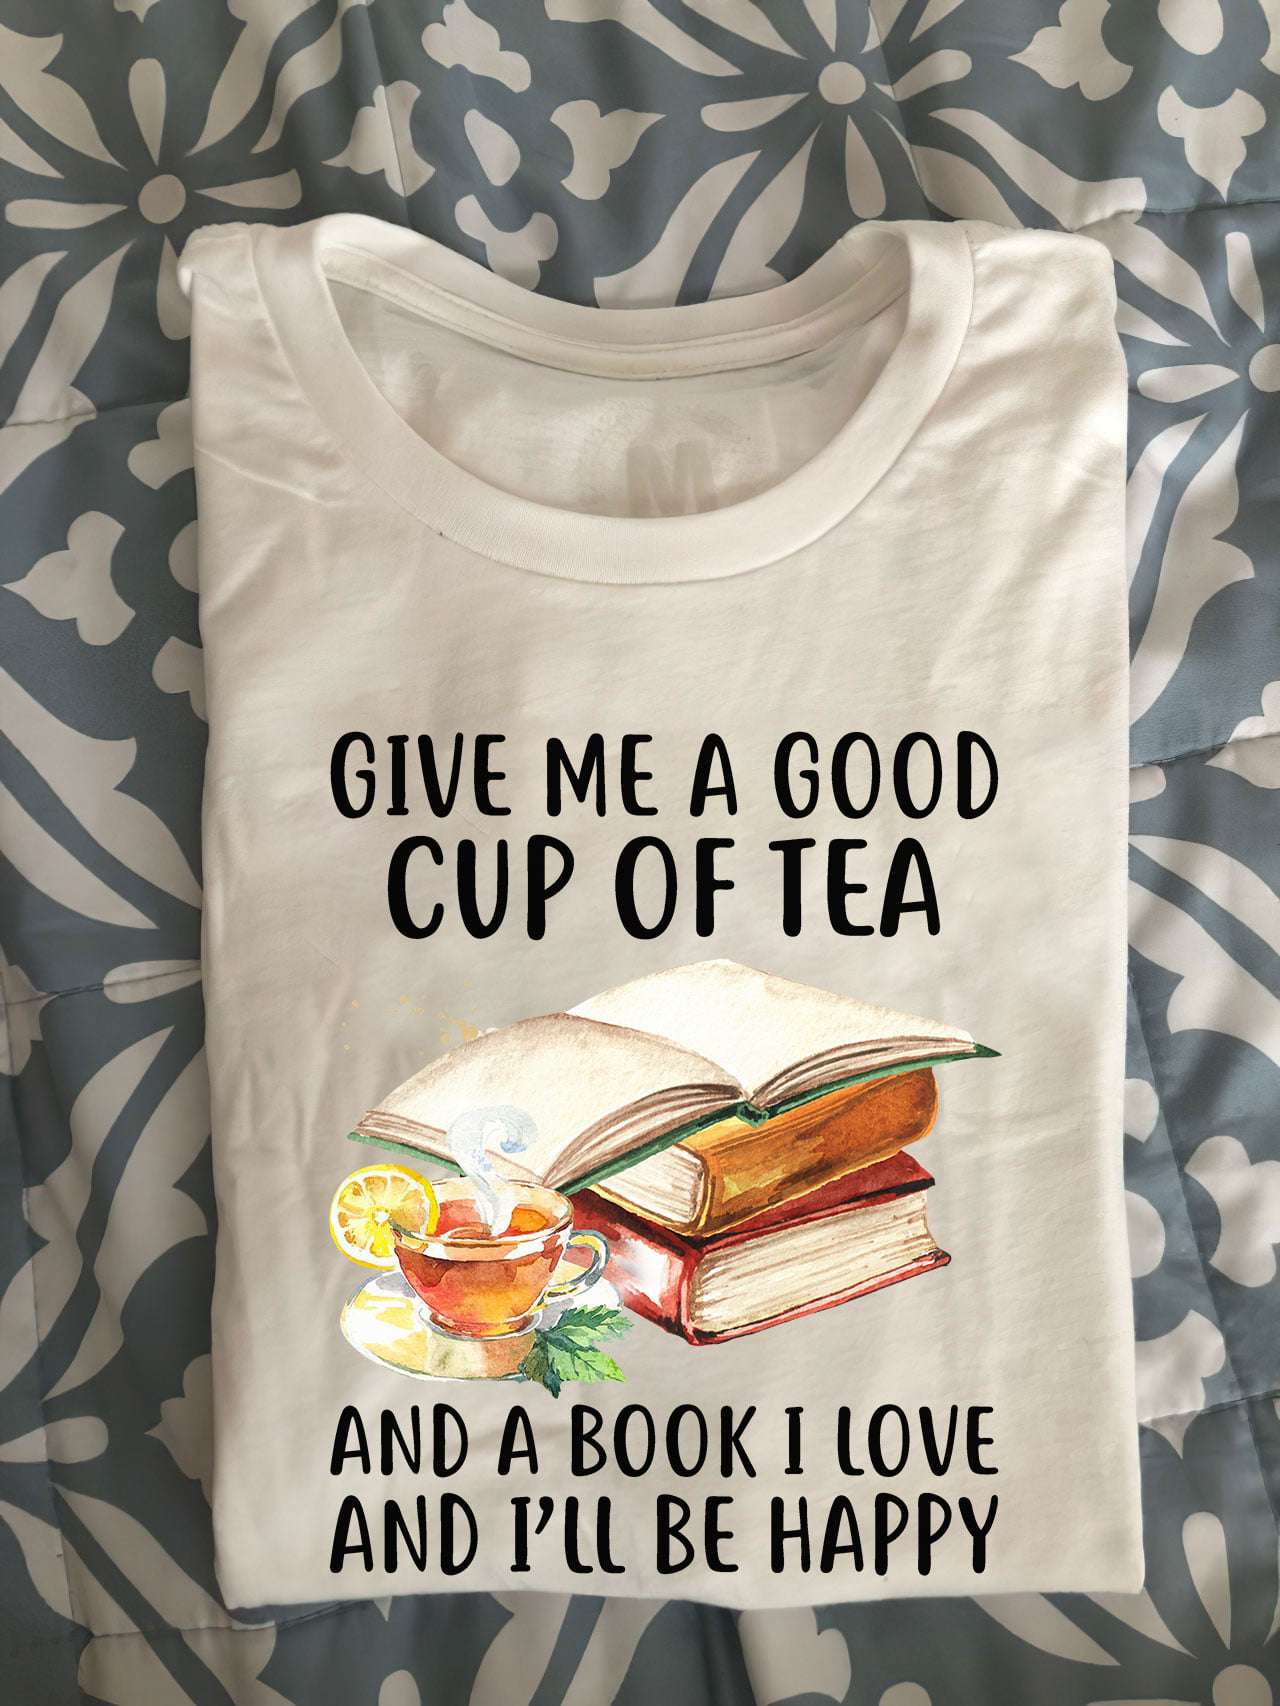 Give me a good cup of tea and a book I love and I'll be happy - Tea and book